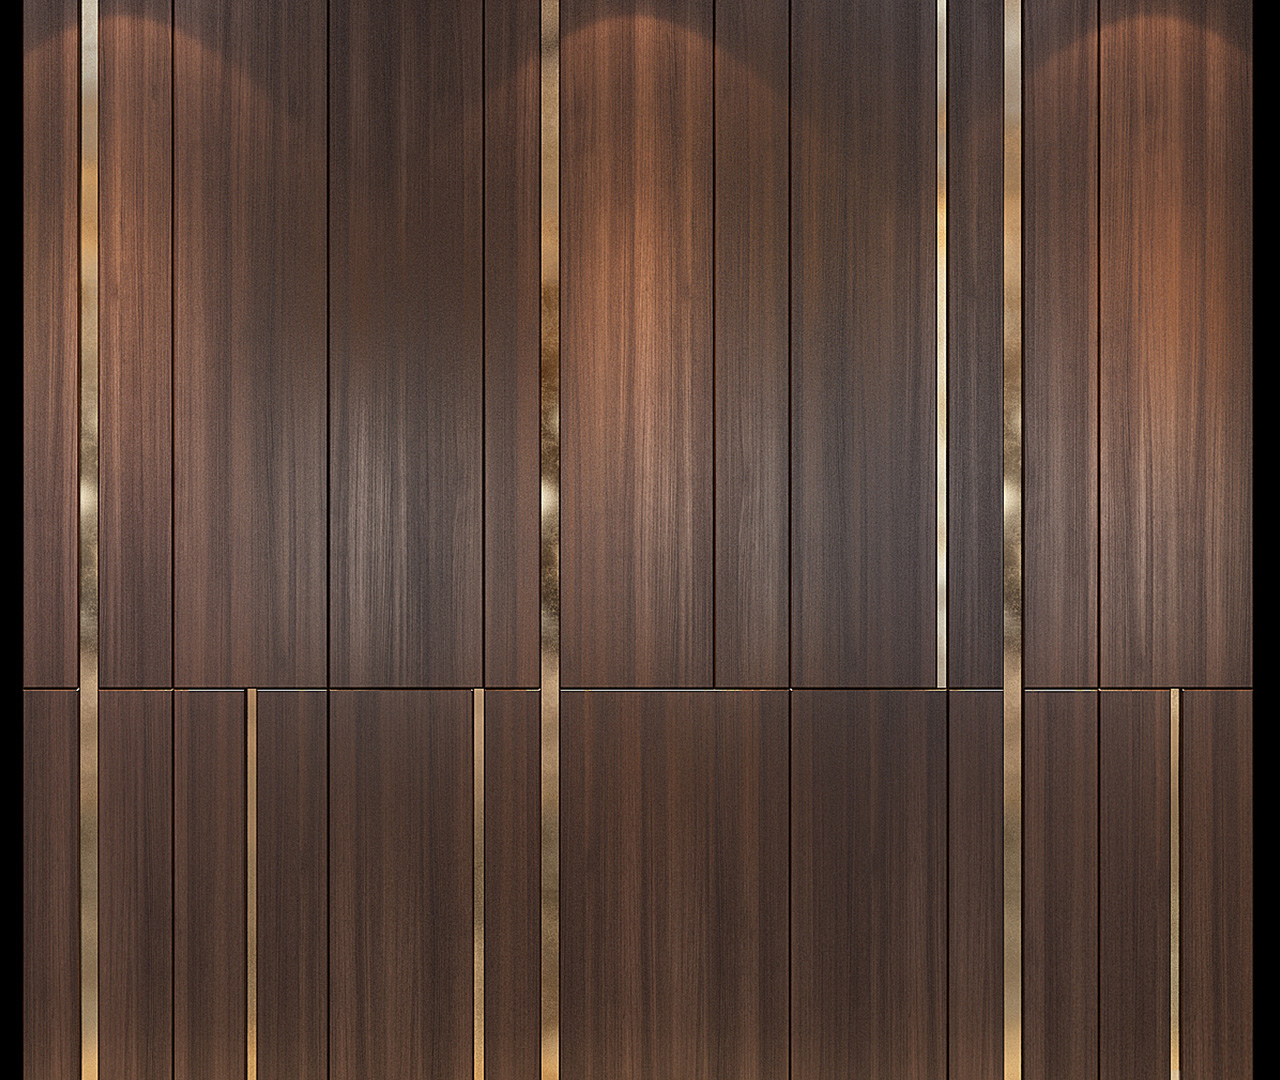 BOLD Wood Venner and Stainless Steel Wall Cladding